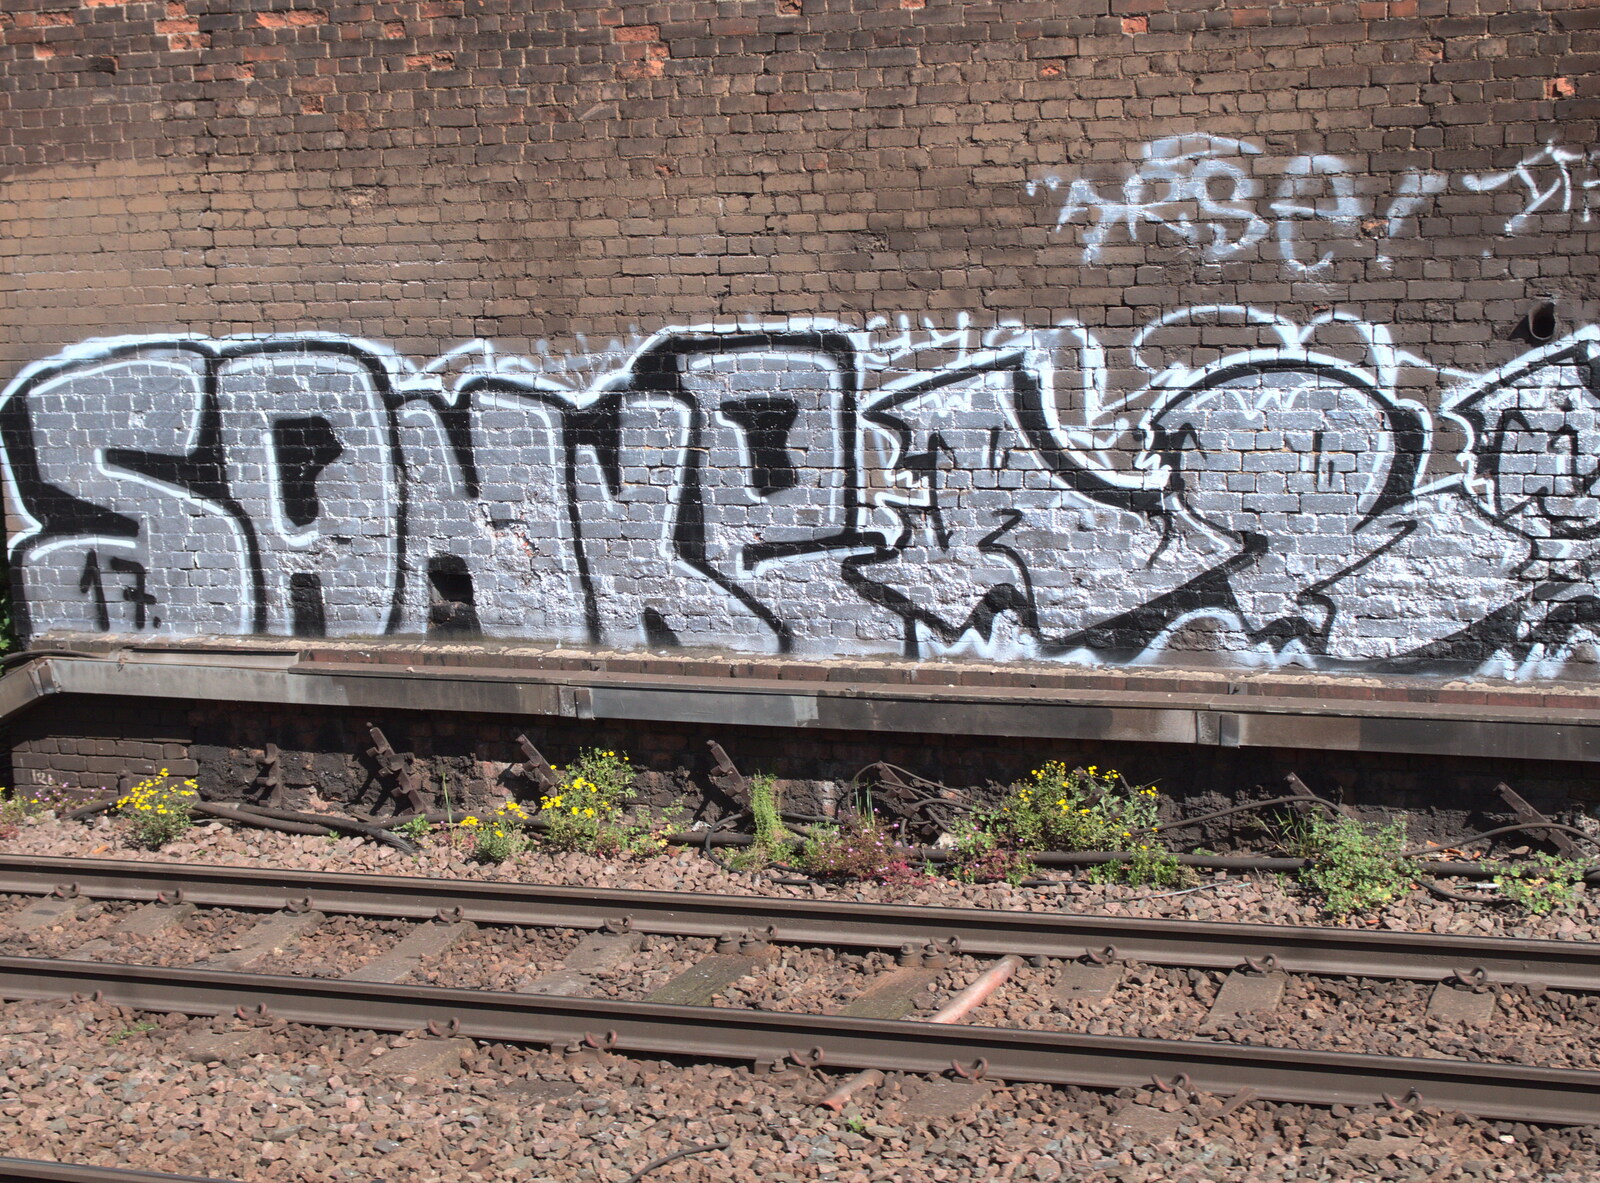 Some silver graffiti - looks like 'Sanke' from A Lunchtime Trip to Peking Seoul, Paddington, London - 9th May 2018